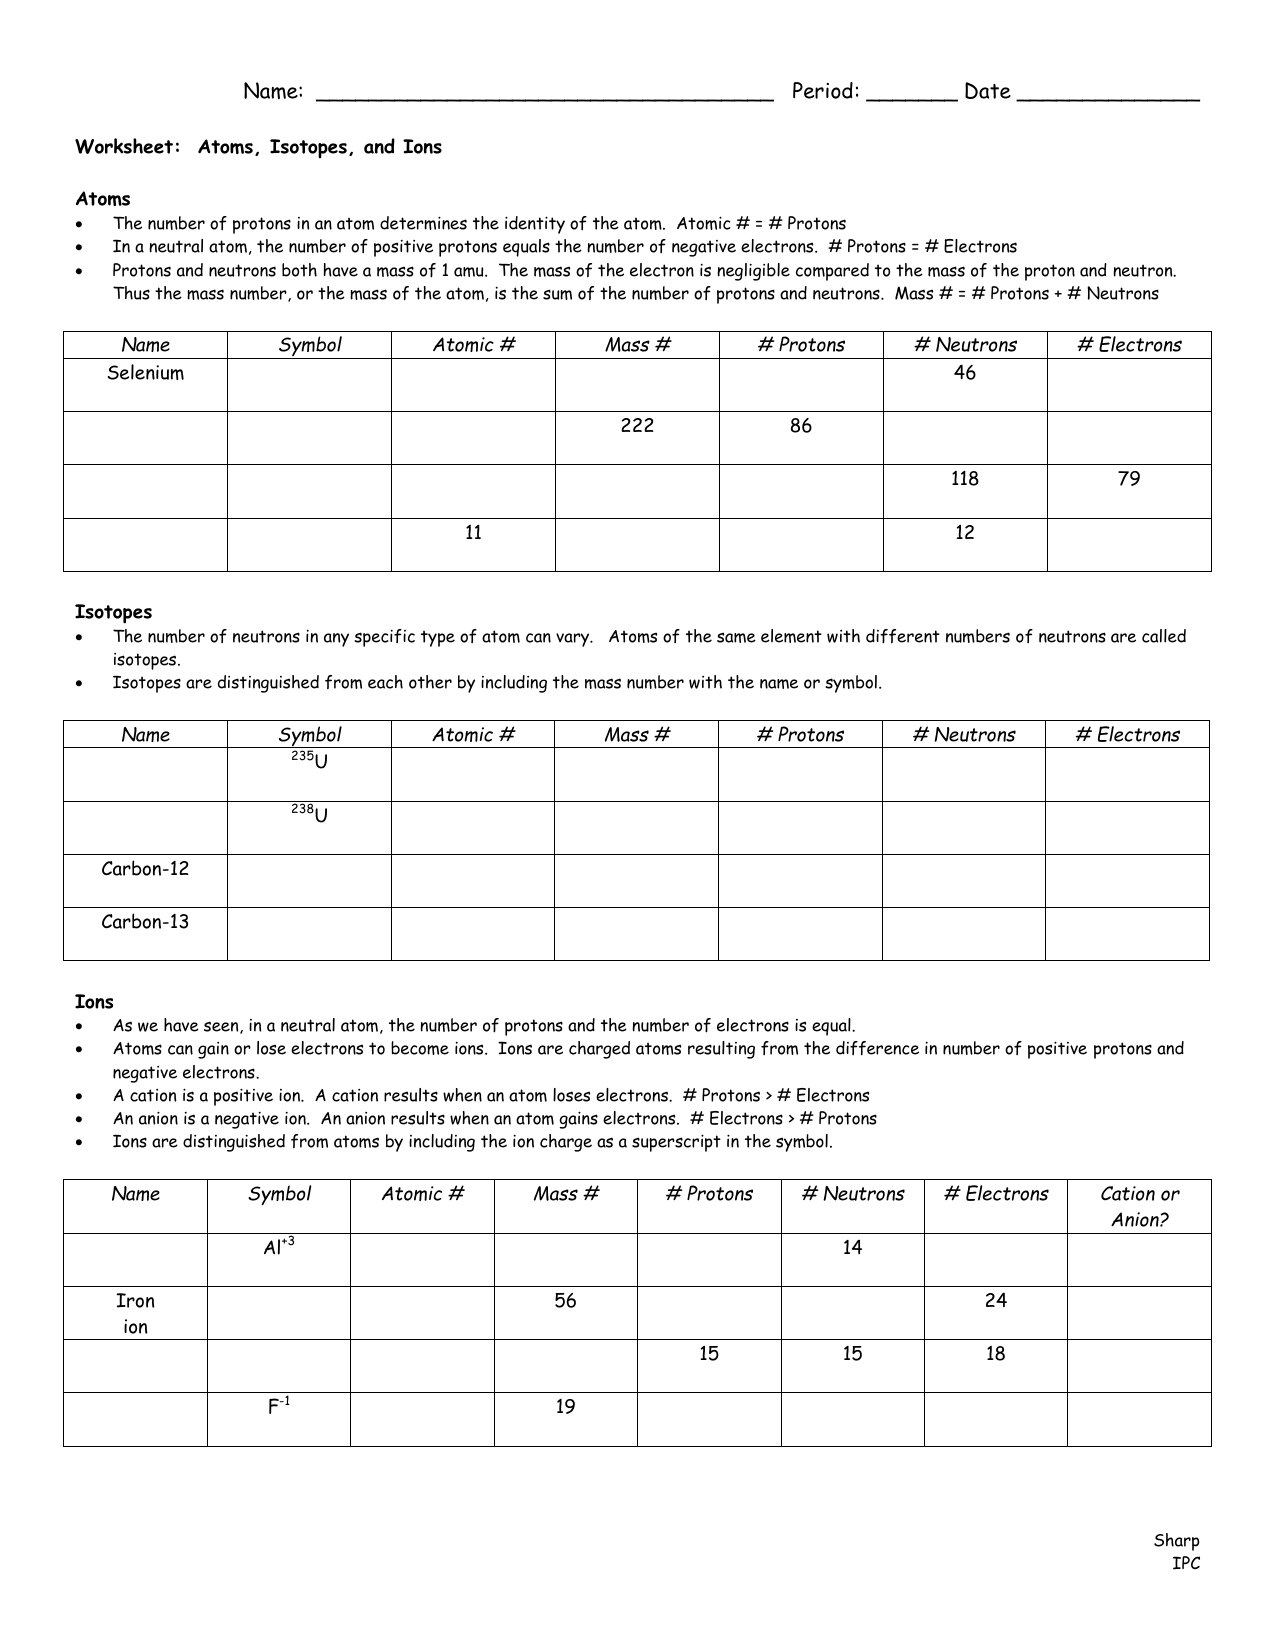 Atoms, Isotopes, & Ions Worksheet For Atoms And Isotopes Worksheet Answers